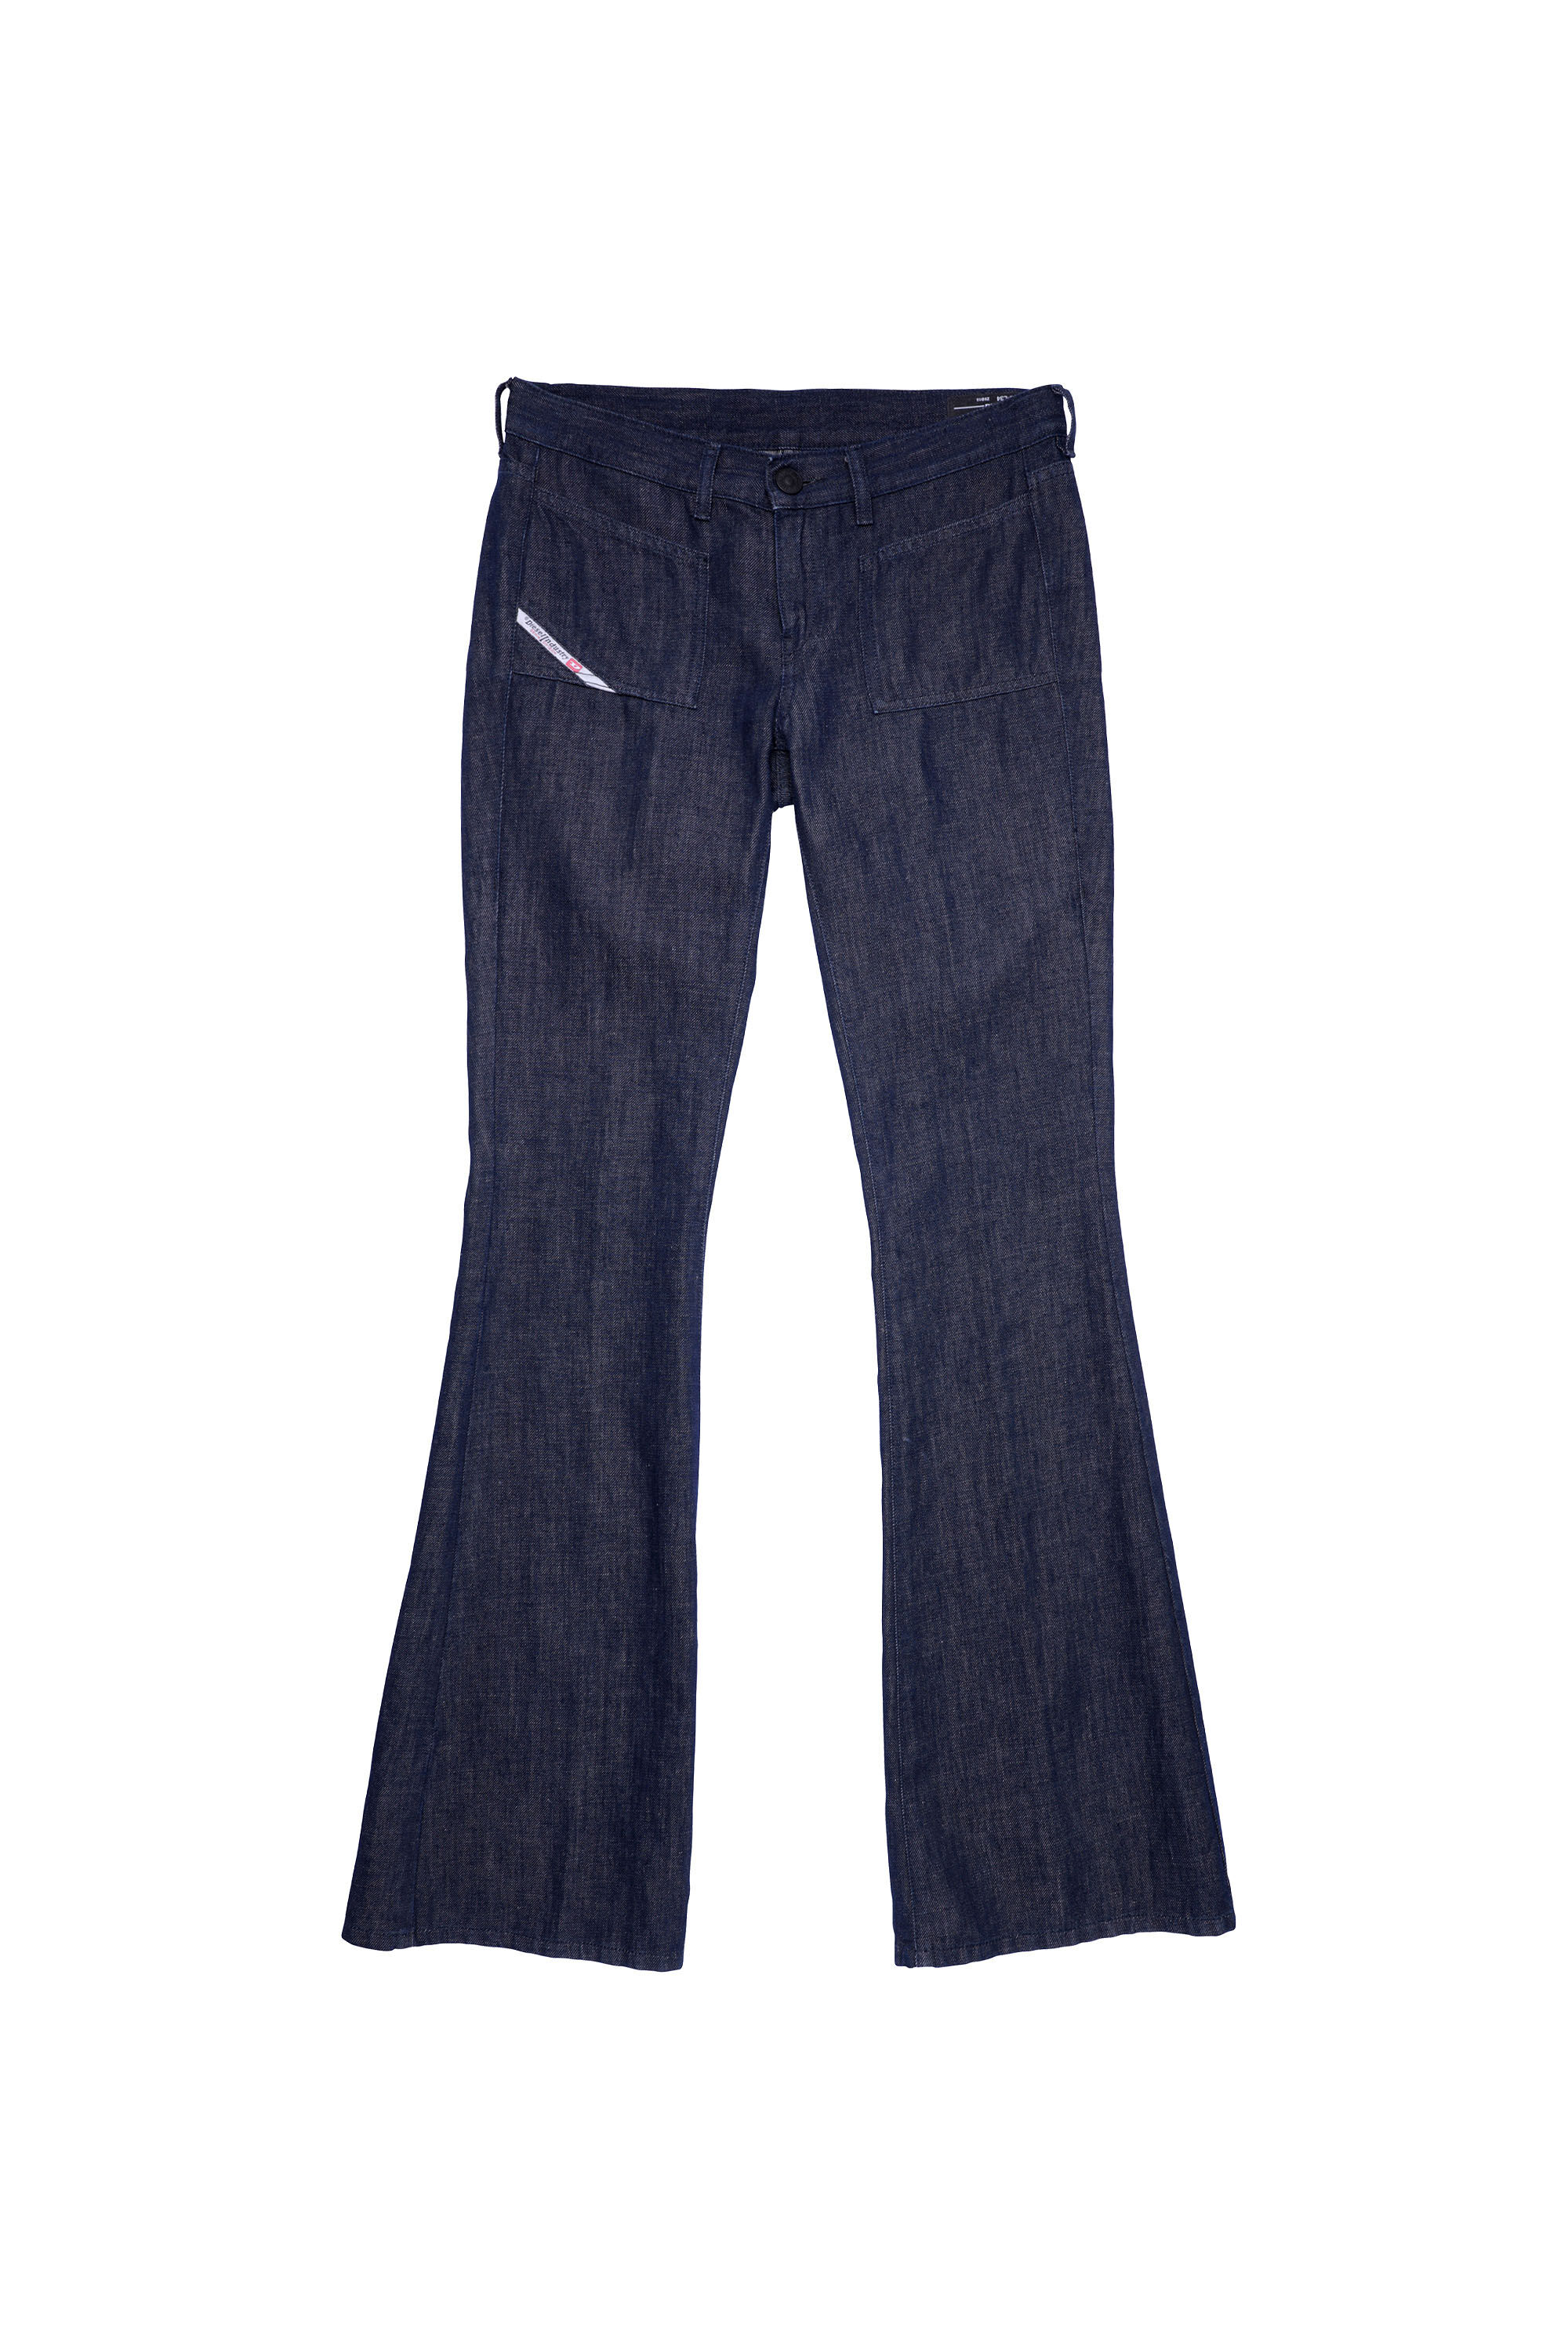 Diesel - 1969 D-EBBEY Z9B15 Bootcut and Flare Jeans,  - Image 2